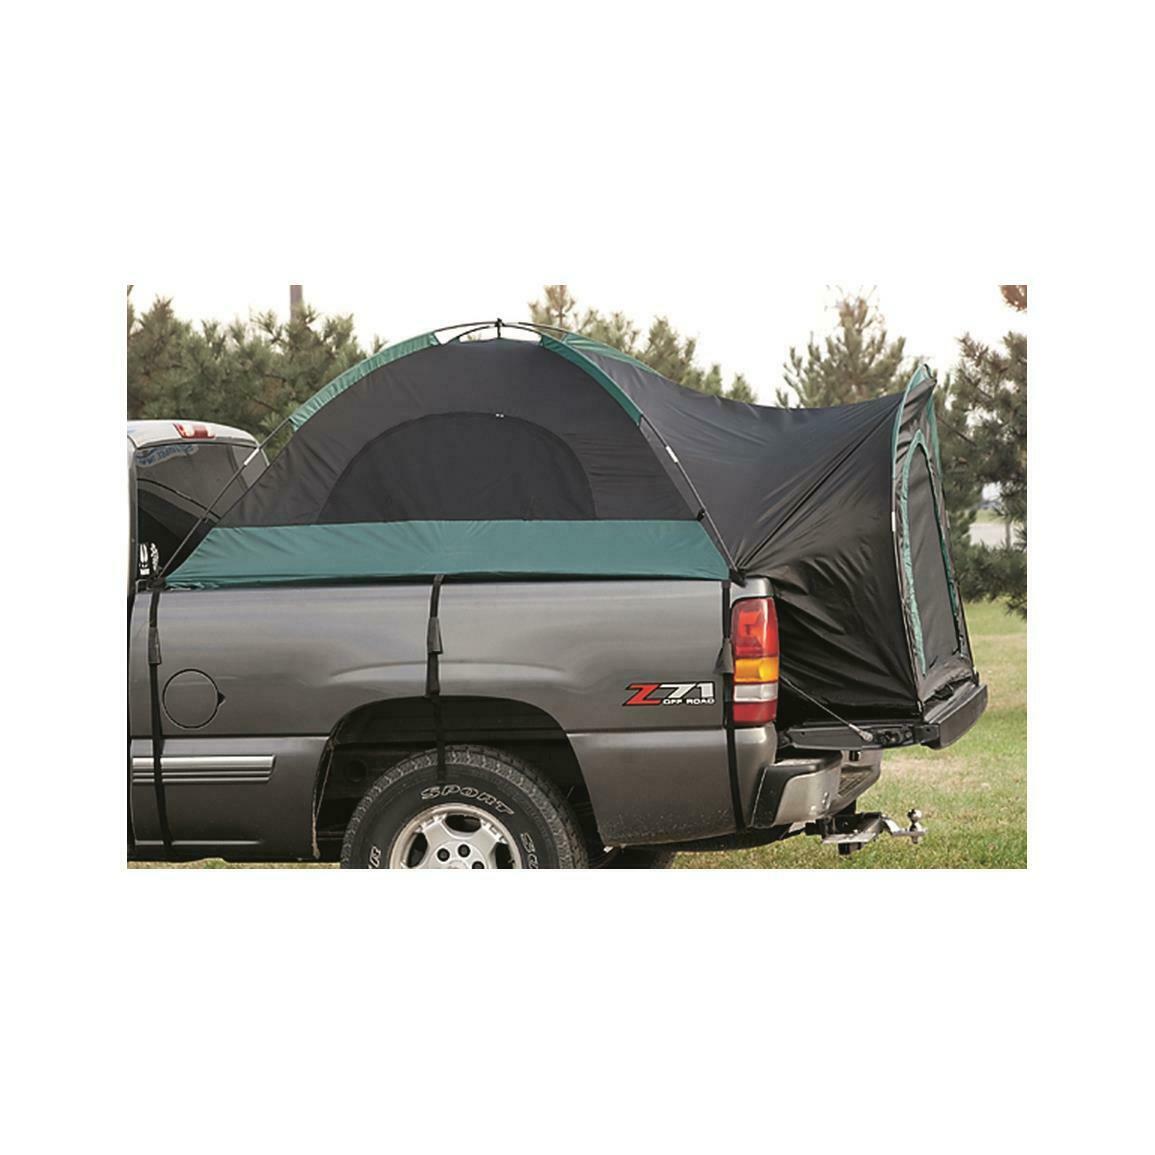 Full Size Pickup Short Bed Box Truck Tent Camping Outdoor Compact